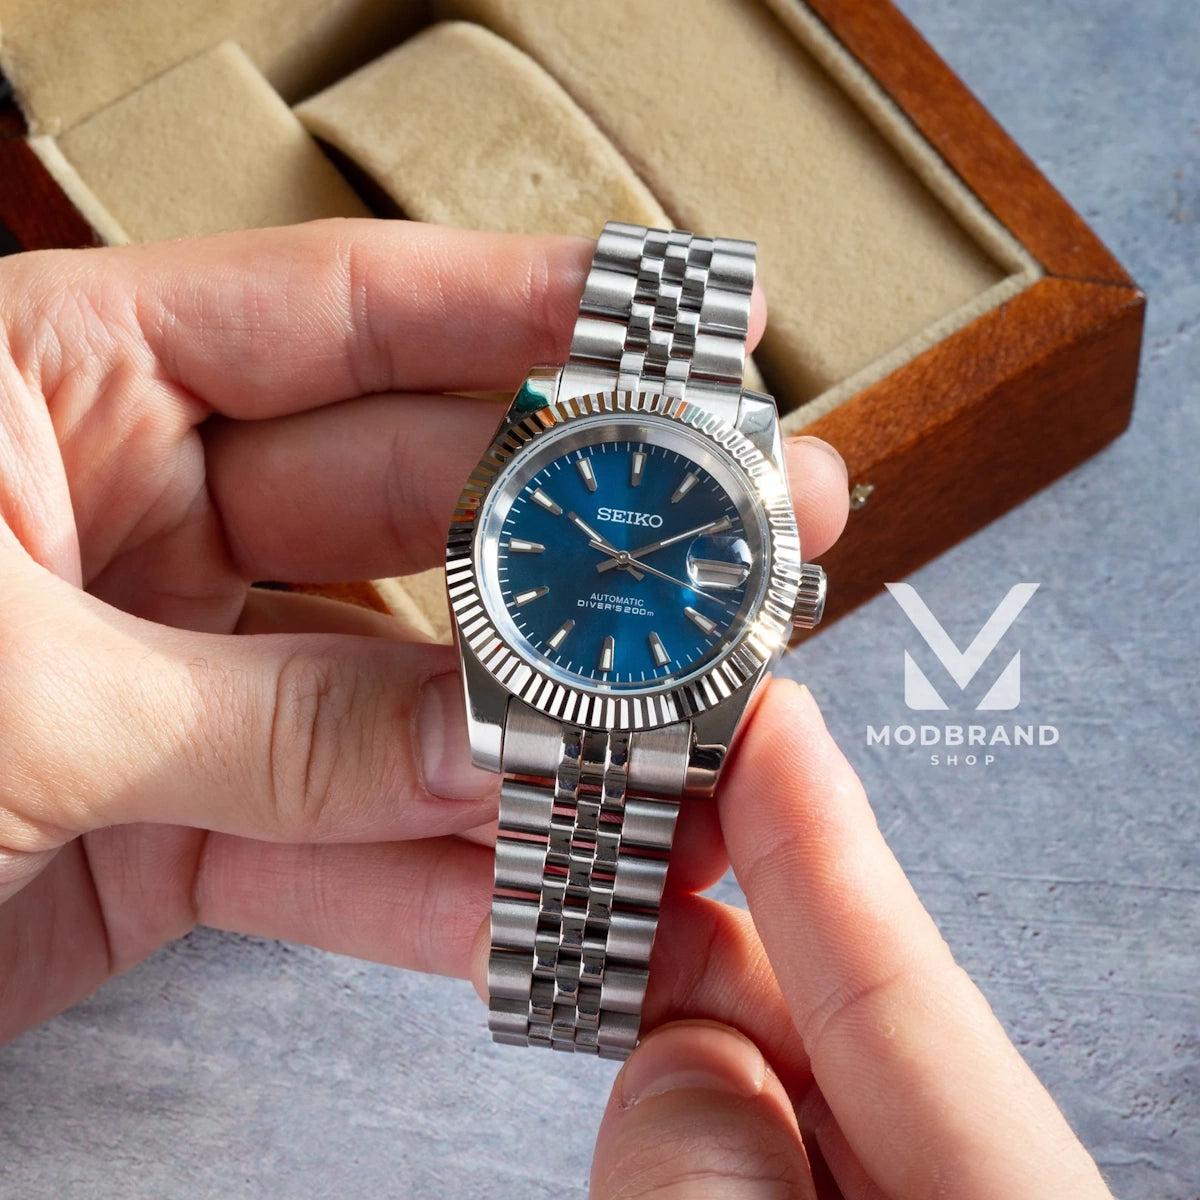 Seiko Datejust Mod Watch Blue Dial with Skeleton Back